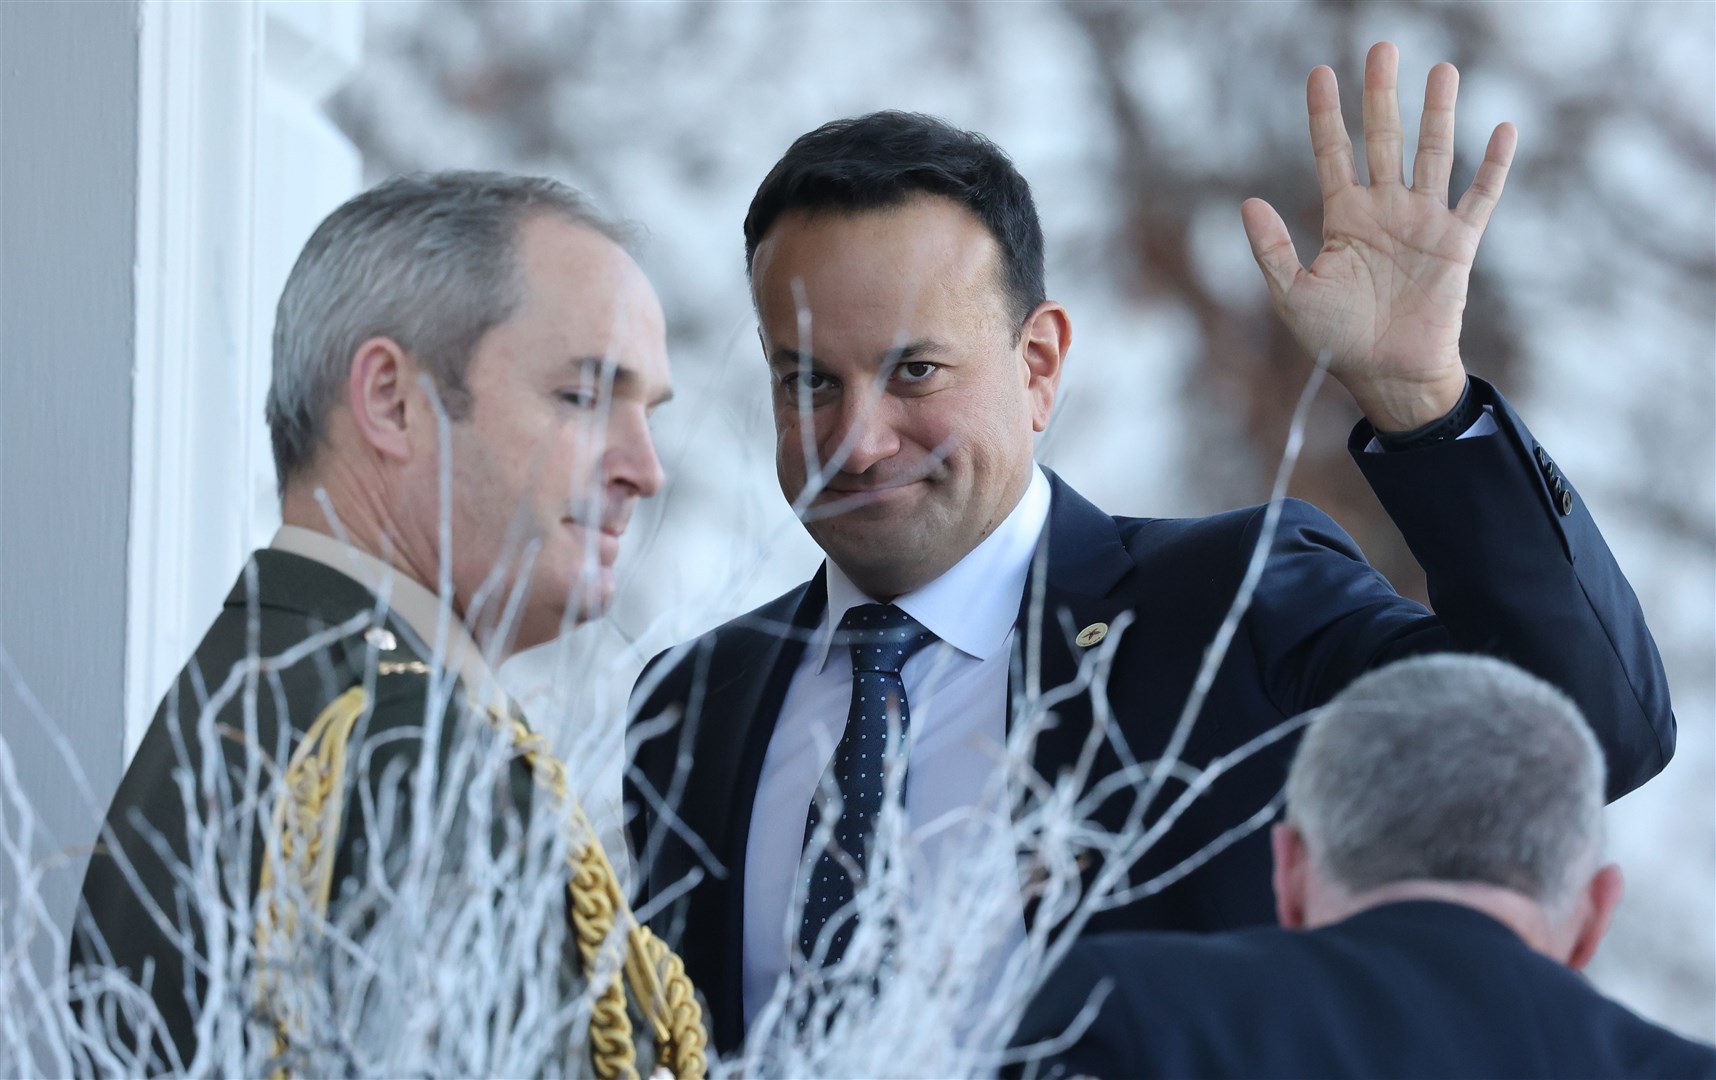 Newly-elected Taoiseach Leo Varadkar arrives to receive his seal of office from President Michael D Higgins at Aras an Uachtarain in Dublin (Nick Bradshaw/PA)